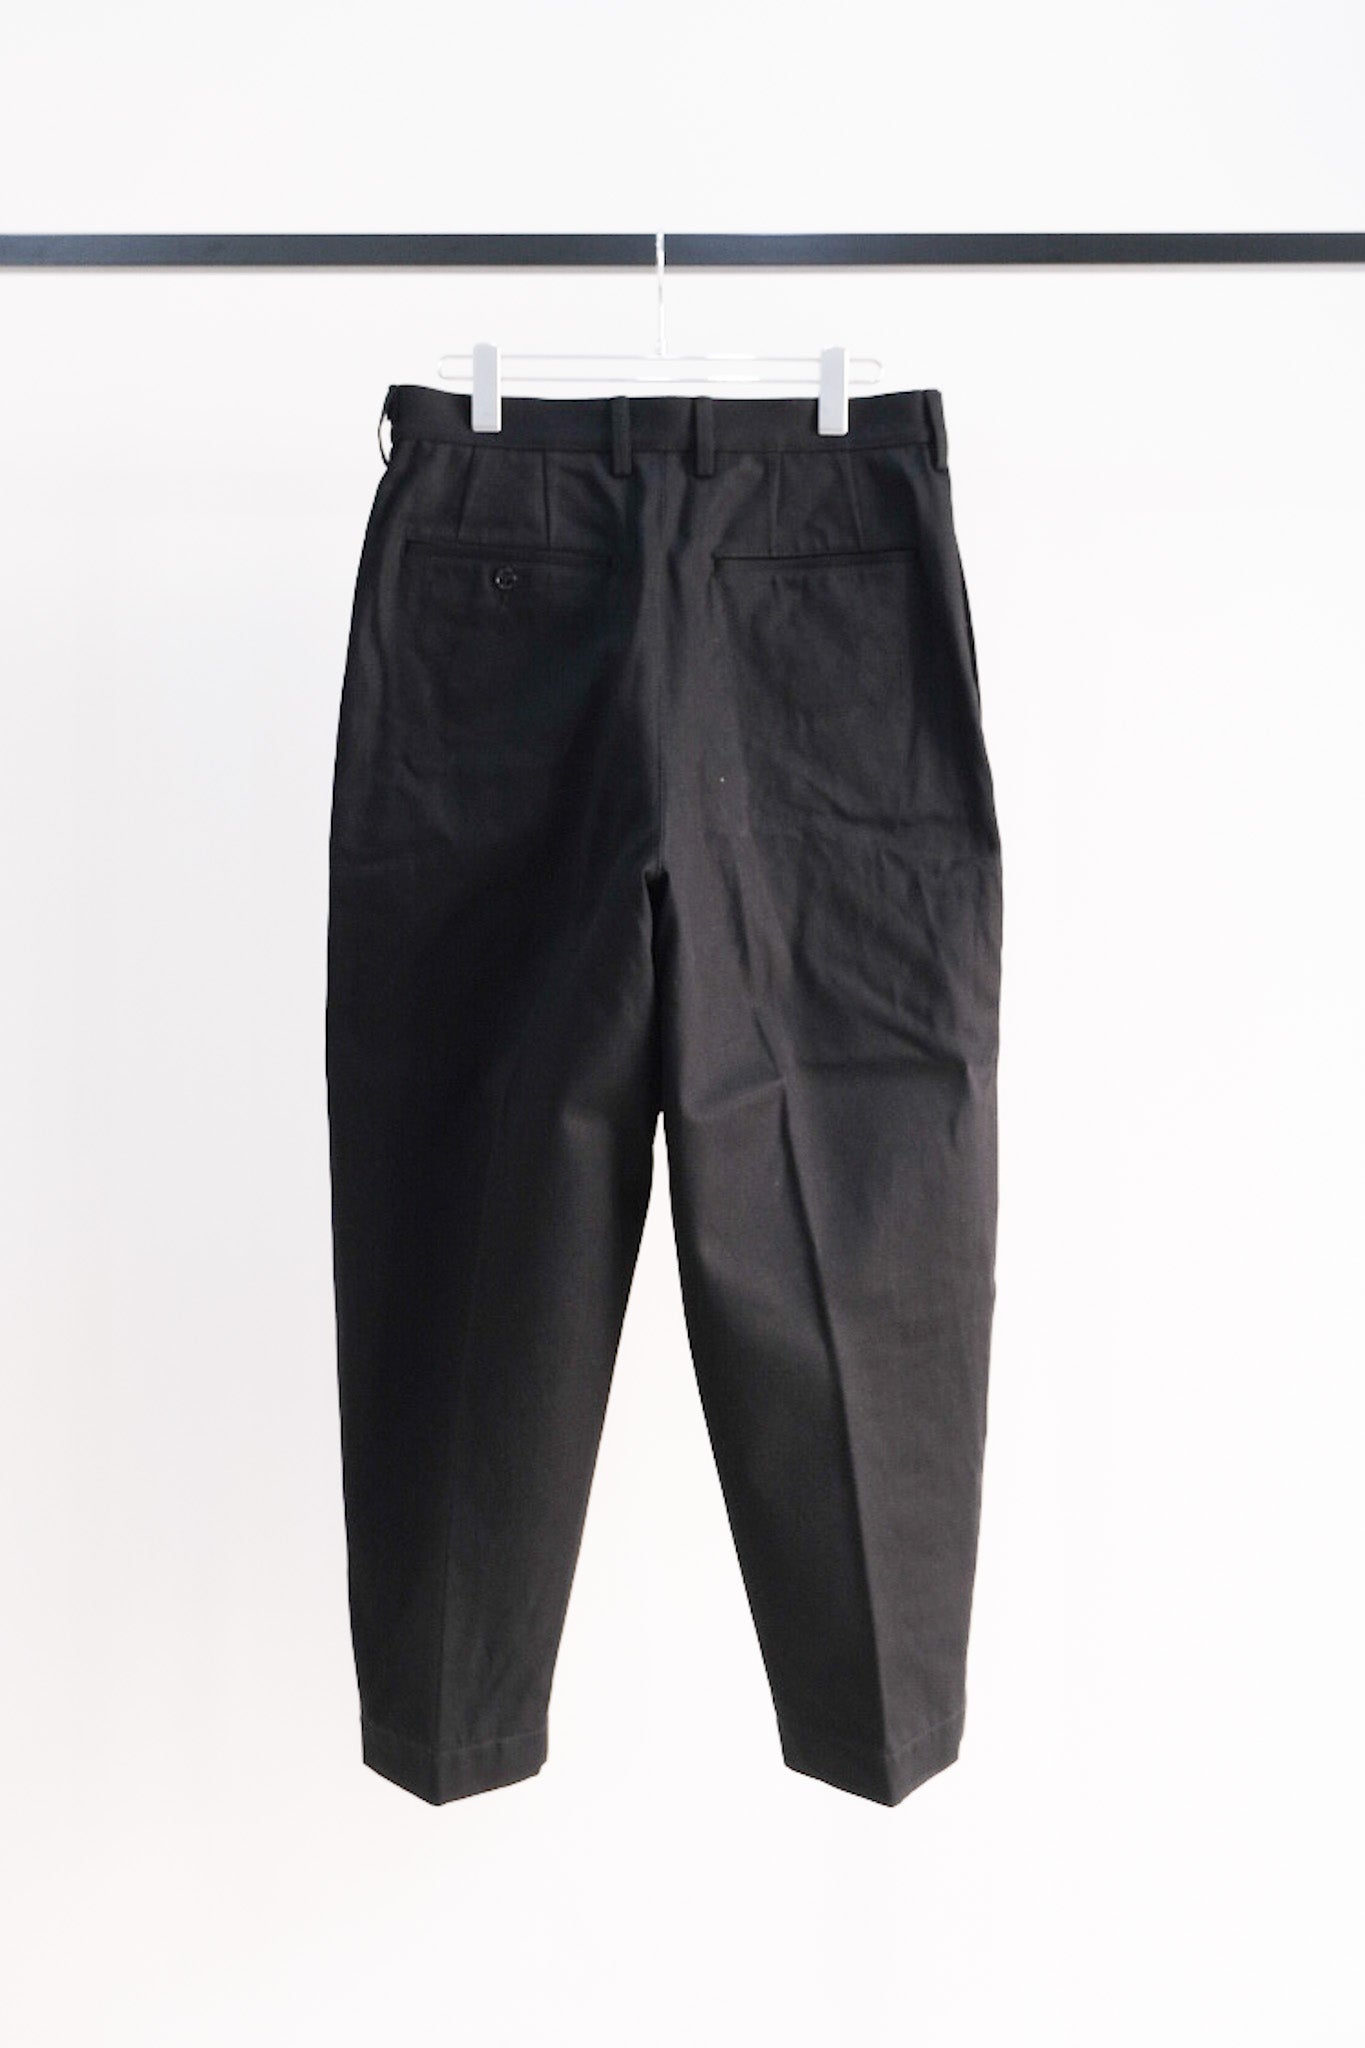 【40% off】Black Denim Tapered Trousers